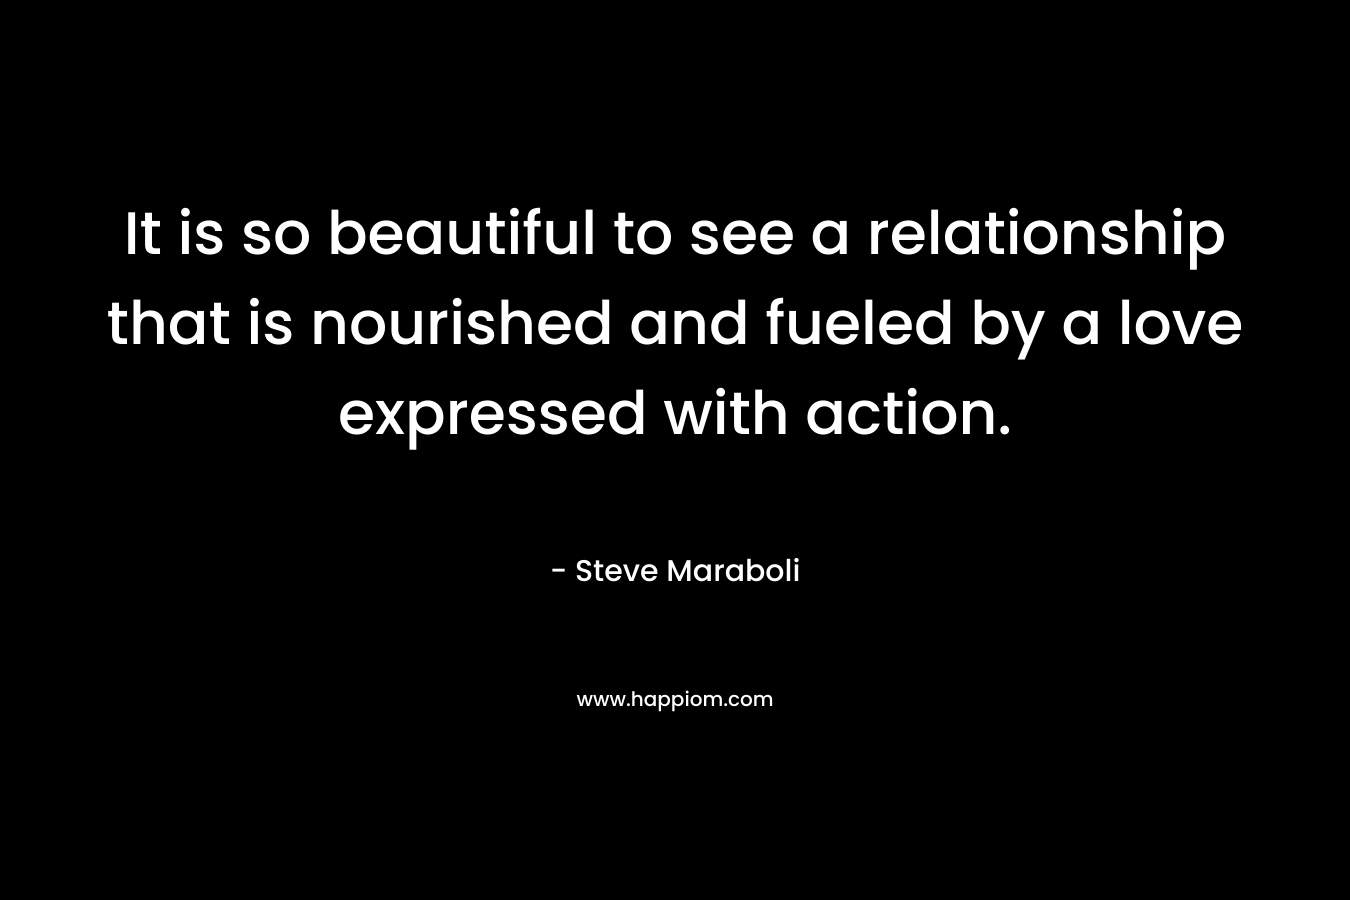 It is so beautiful to see a relationship that is nourished and fueled by a love expressed with action.